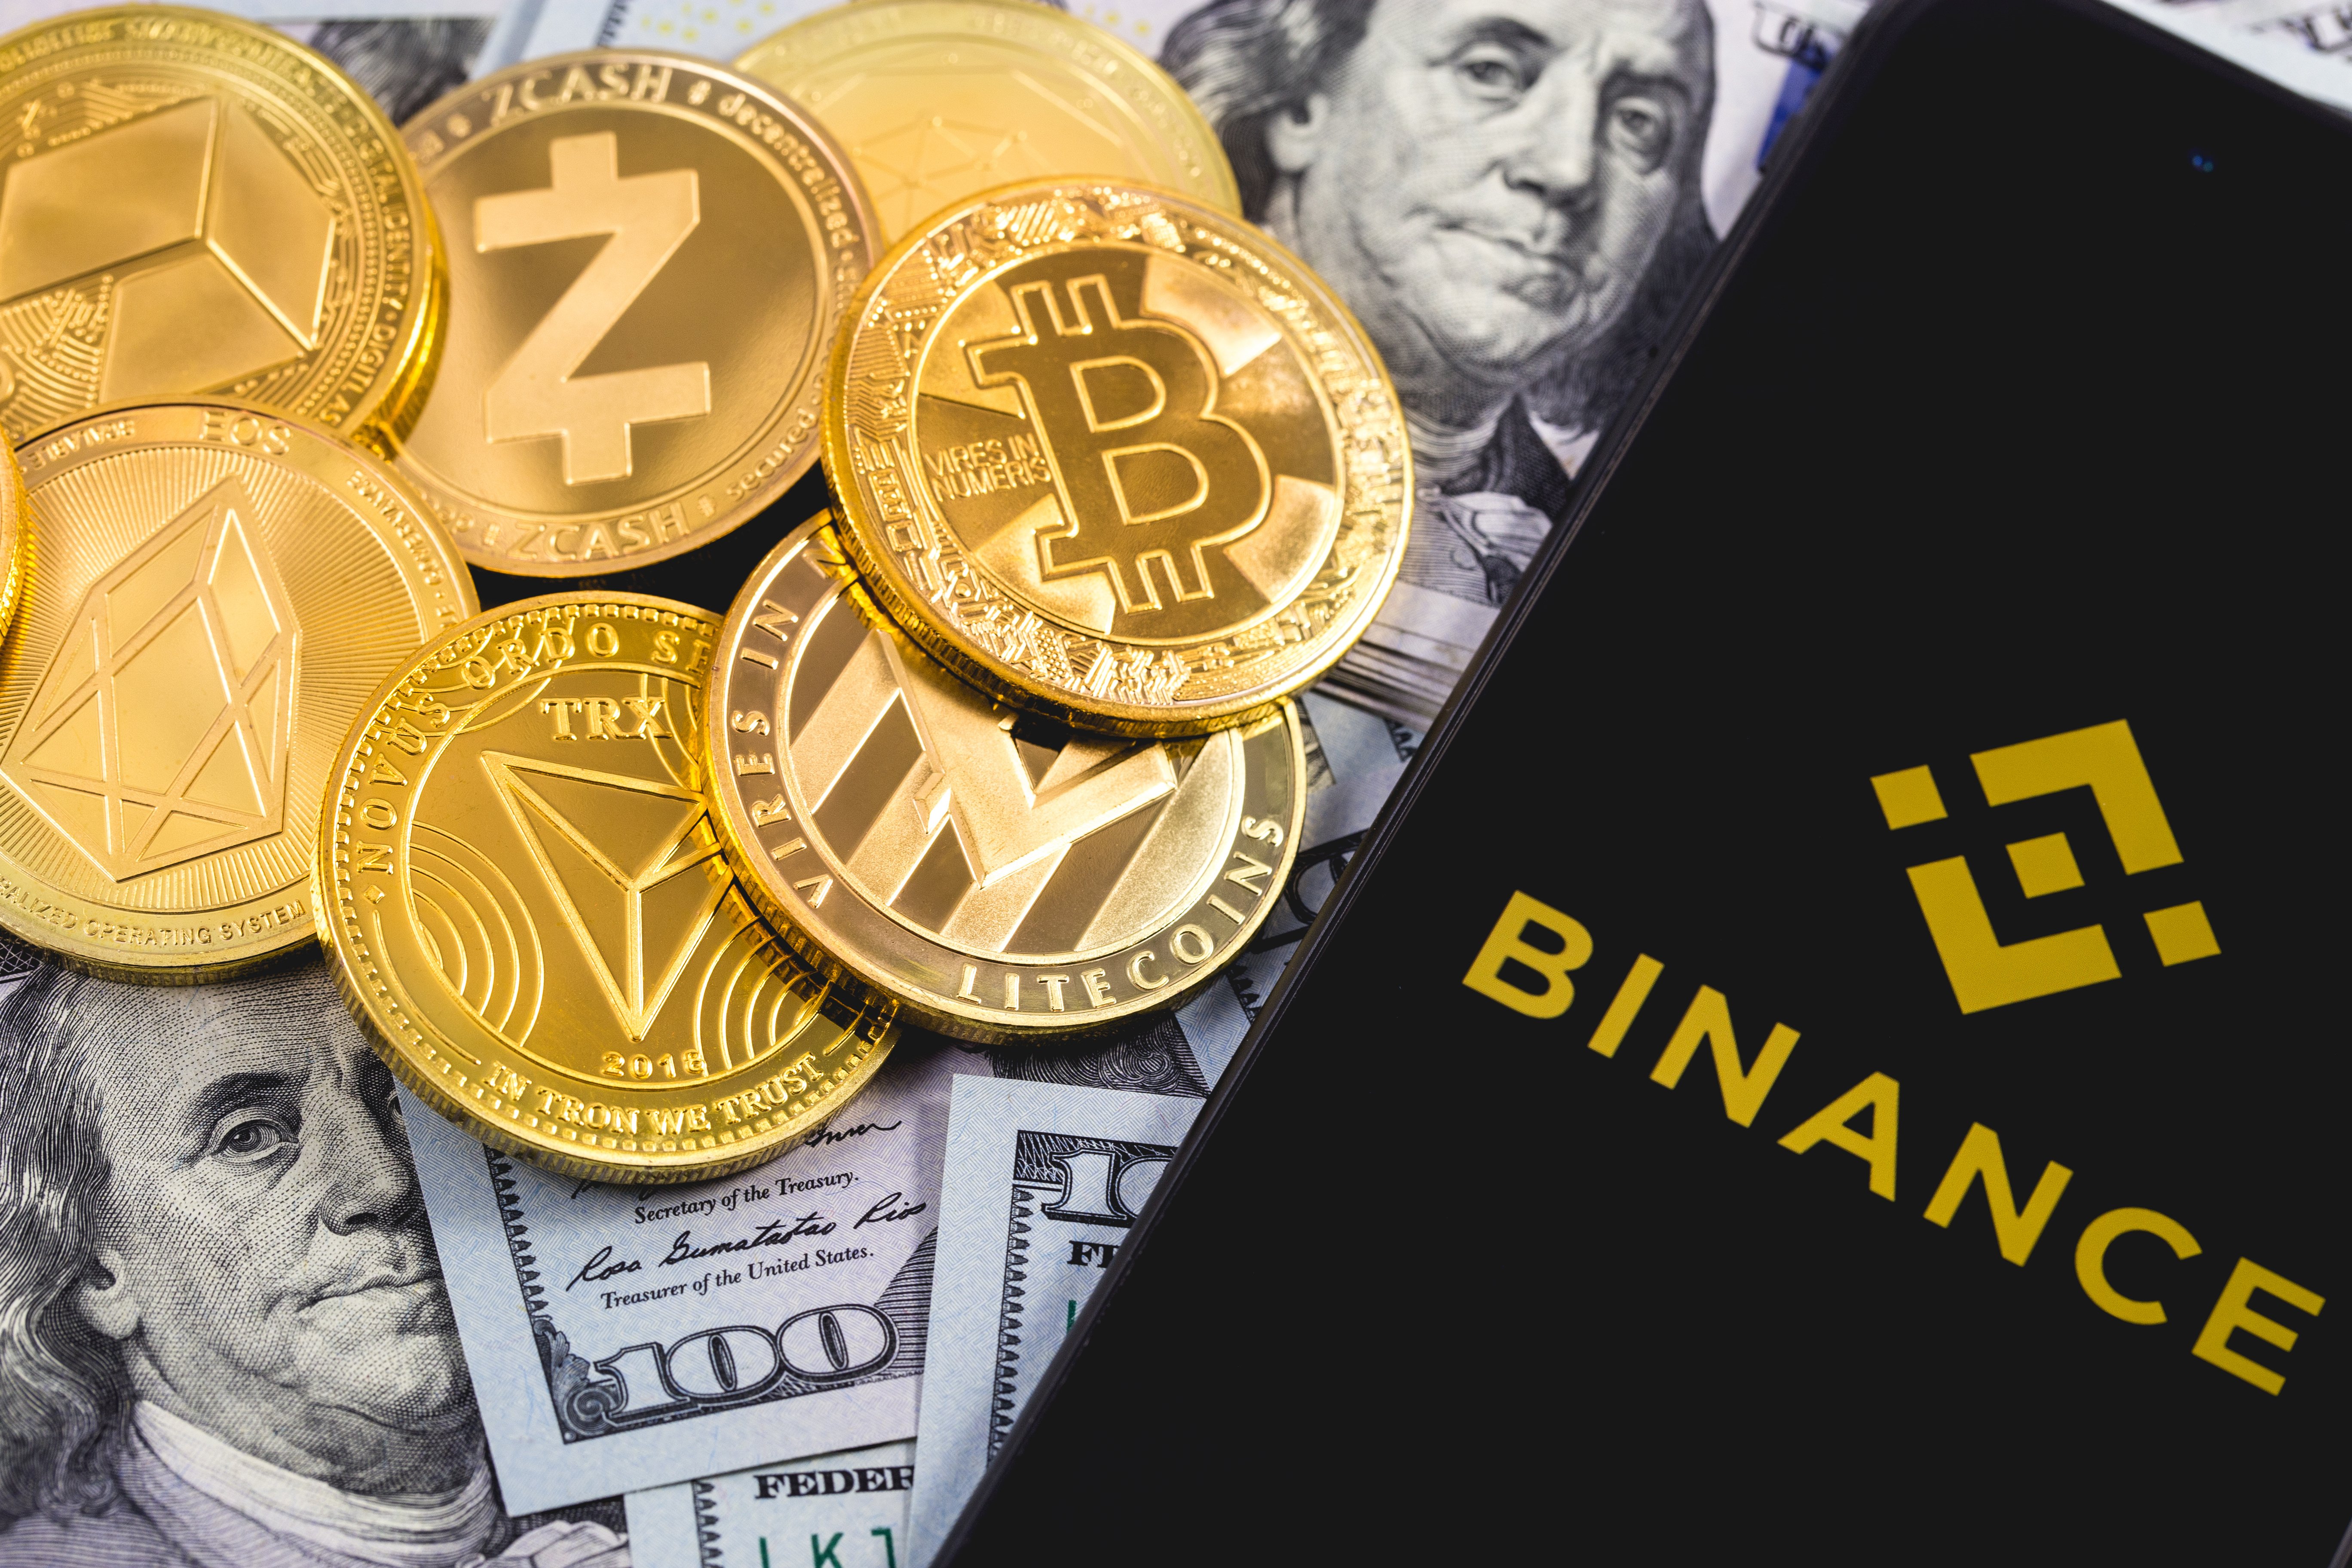 Binance to Cease All Crypto Services in Singapore by February 2022, Here’s Why